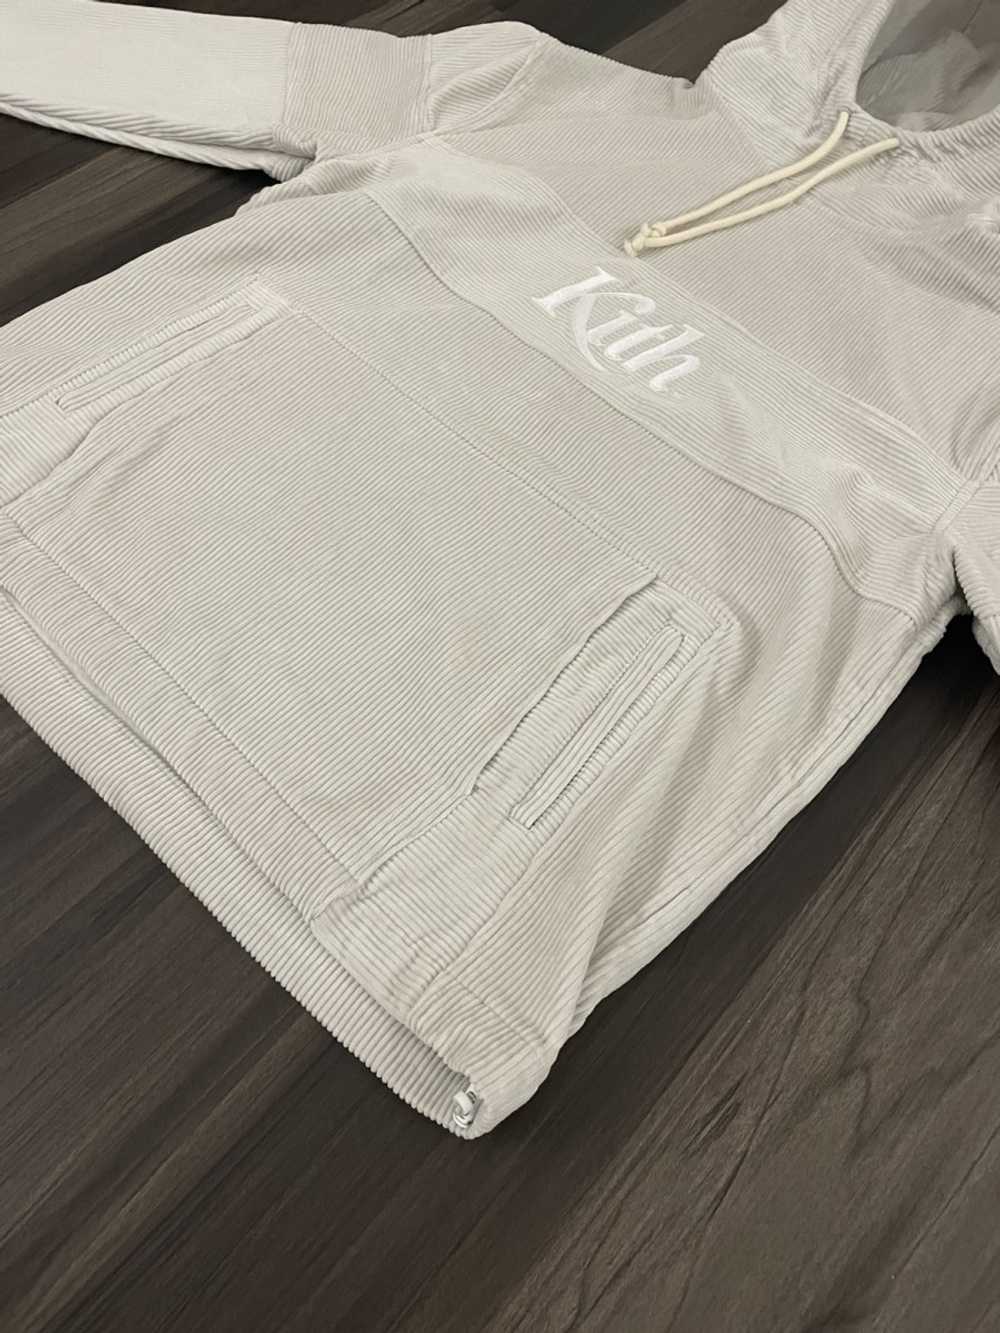 Kith - Corduroy double pocket hoodie with tags - image 5